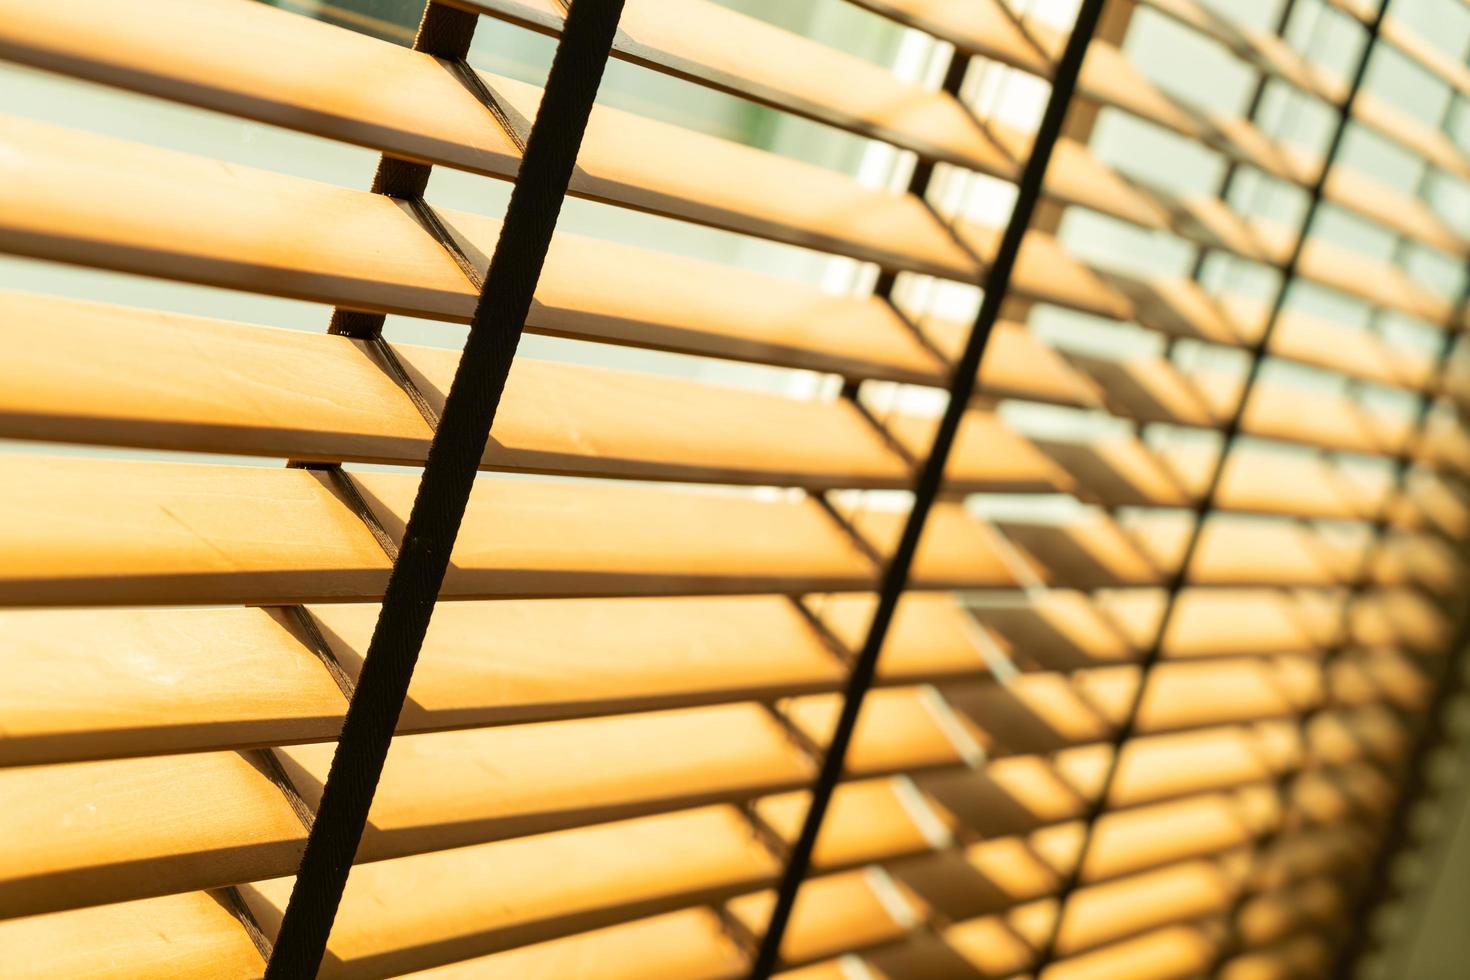 Close-up bamboo blind, bamboo curtain, chick, Venetian blind or sun-blind - soft-focus point photo